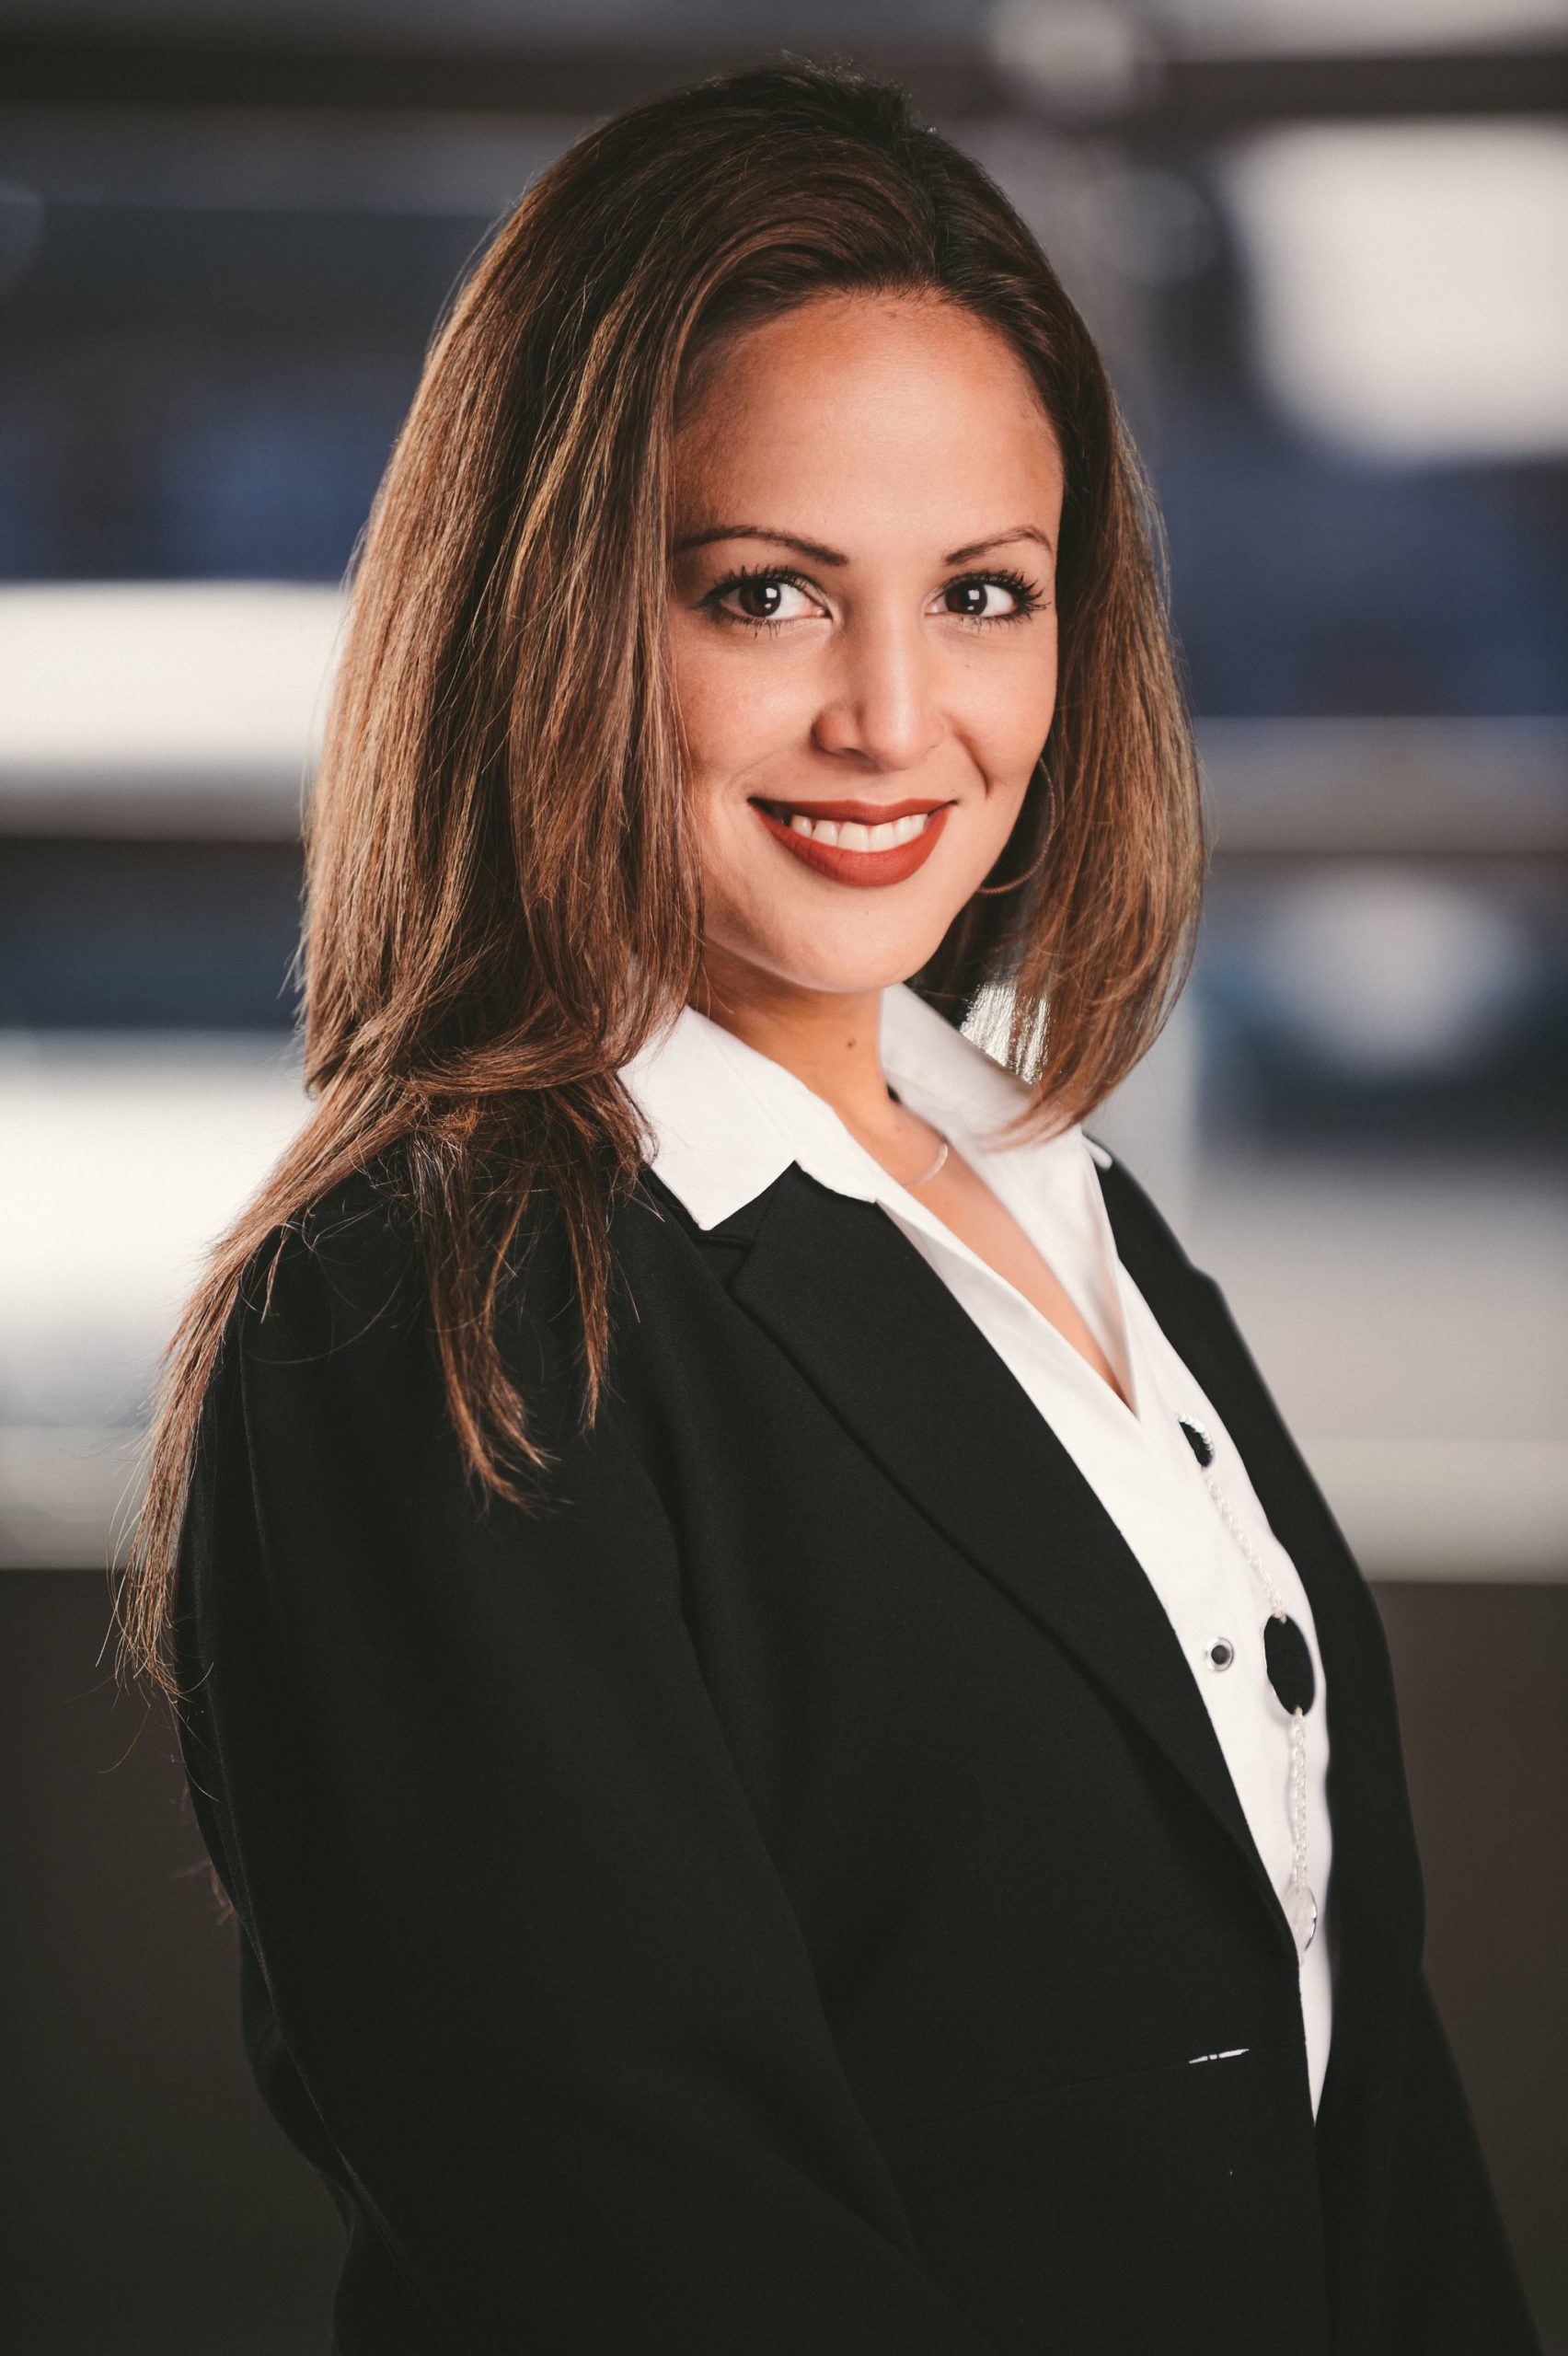 IU C&I Studios Portfolio Van Horn Law Group Head Shot of woman with long brown hair wearing a black dress jacket with white blouse